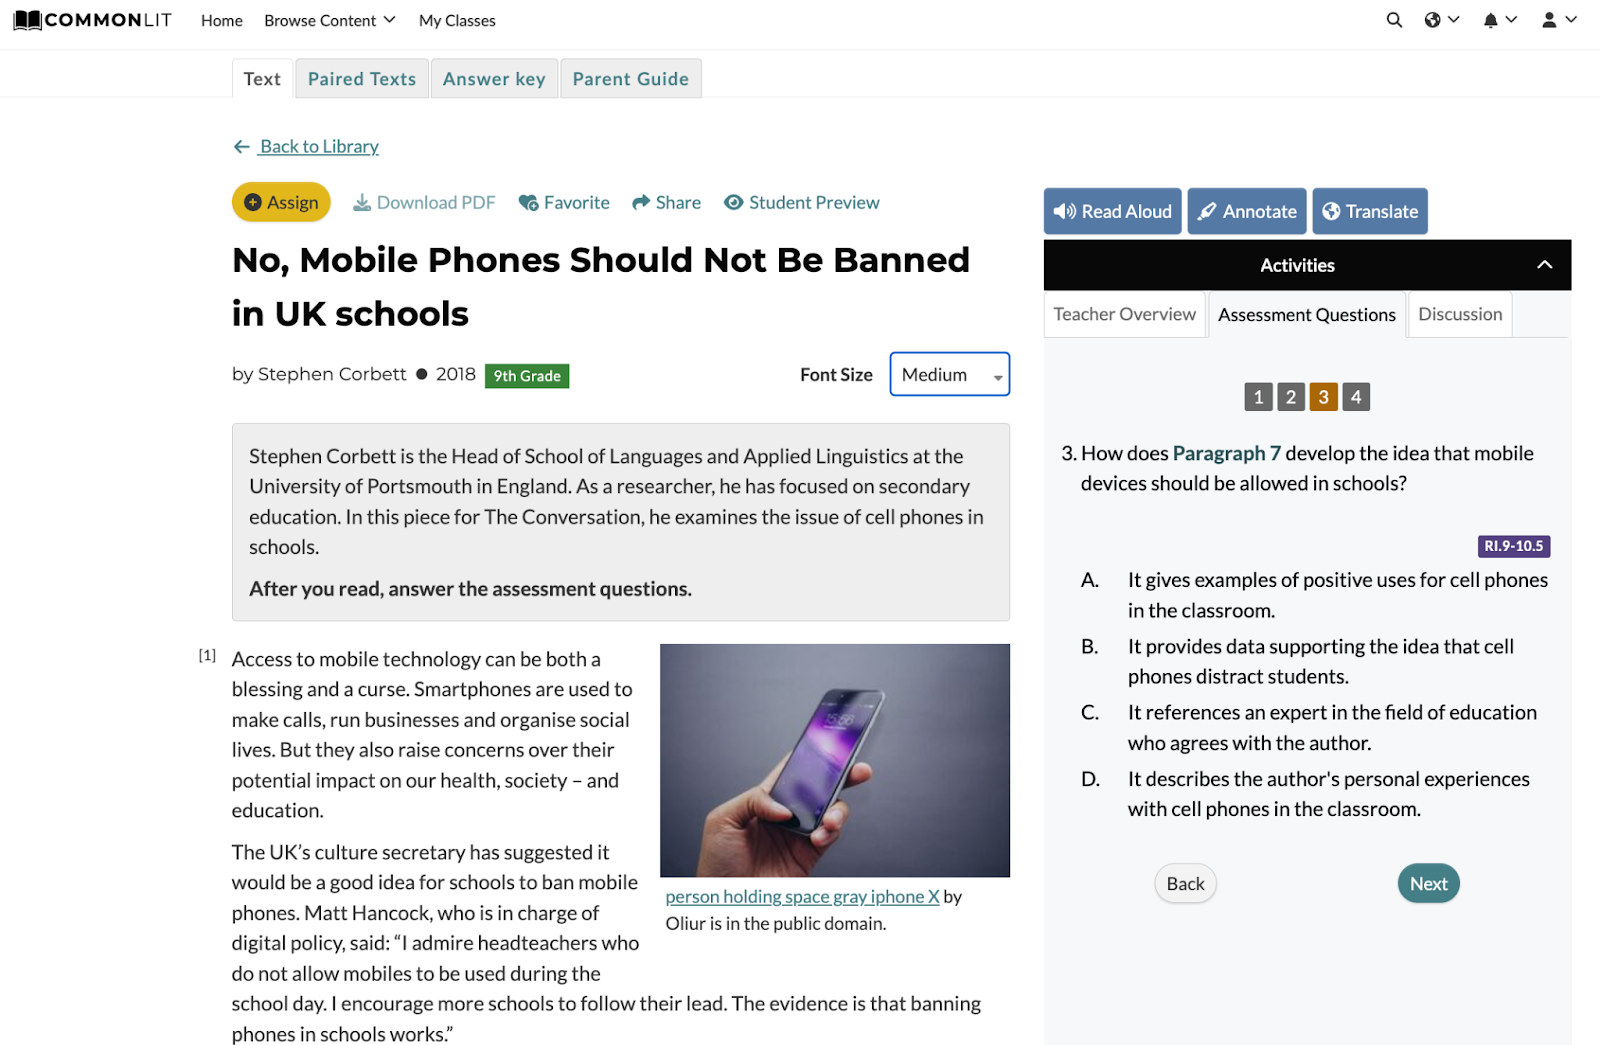 Screenshot of an argumentative article for students  “No, Mobile Phones Should Not be Banned in UK Schools”